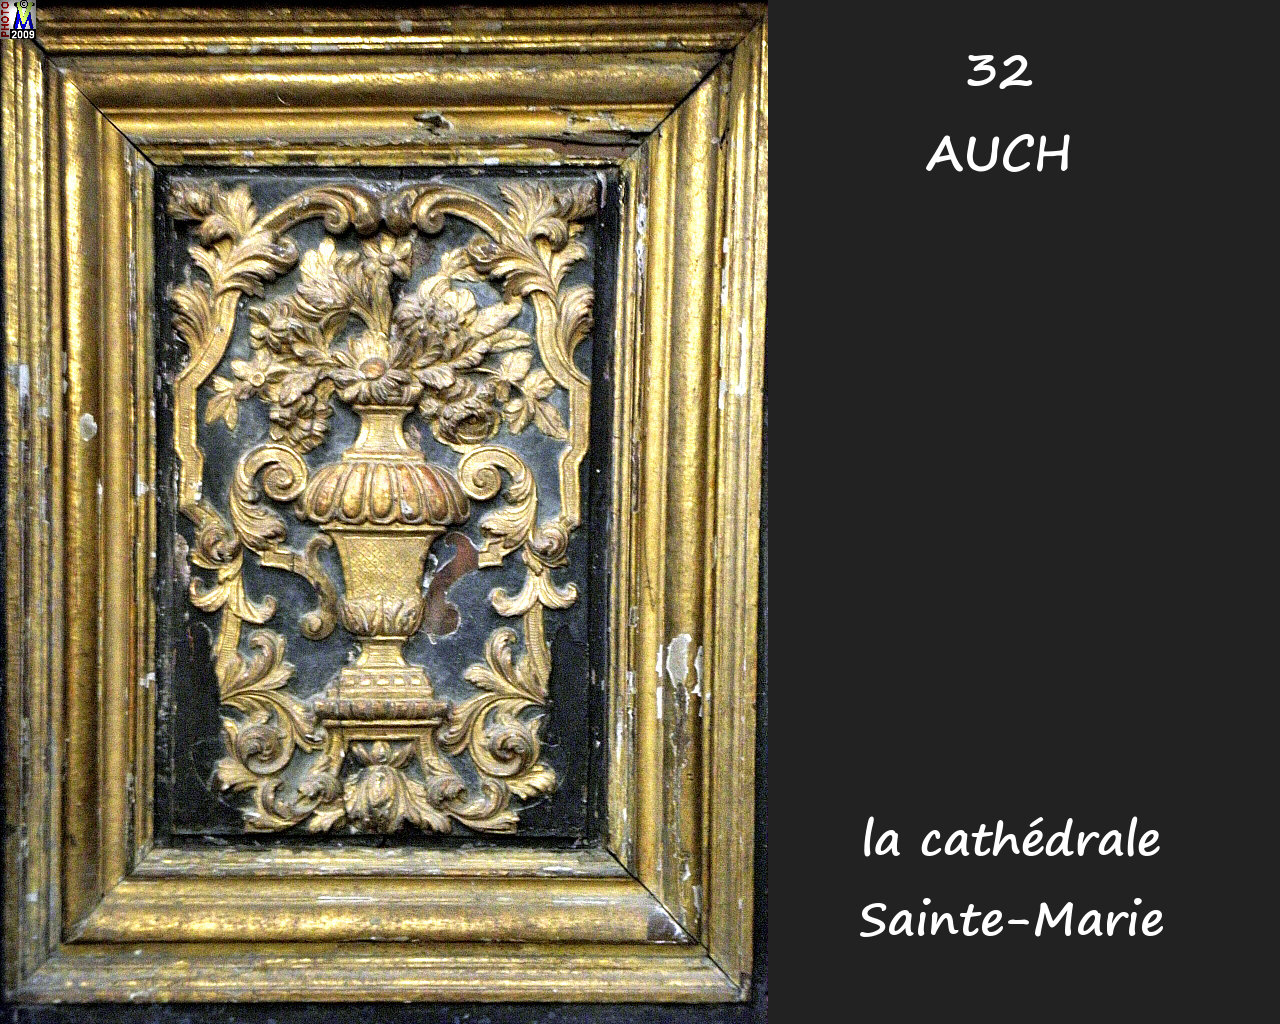 32AUCH_cathedrale_250.jpg